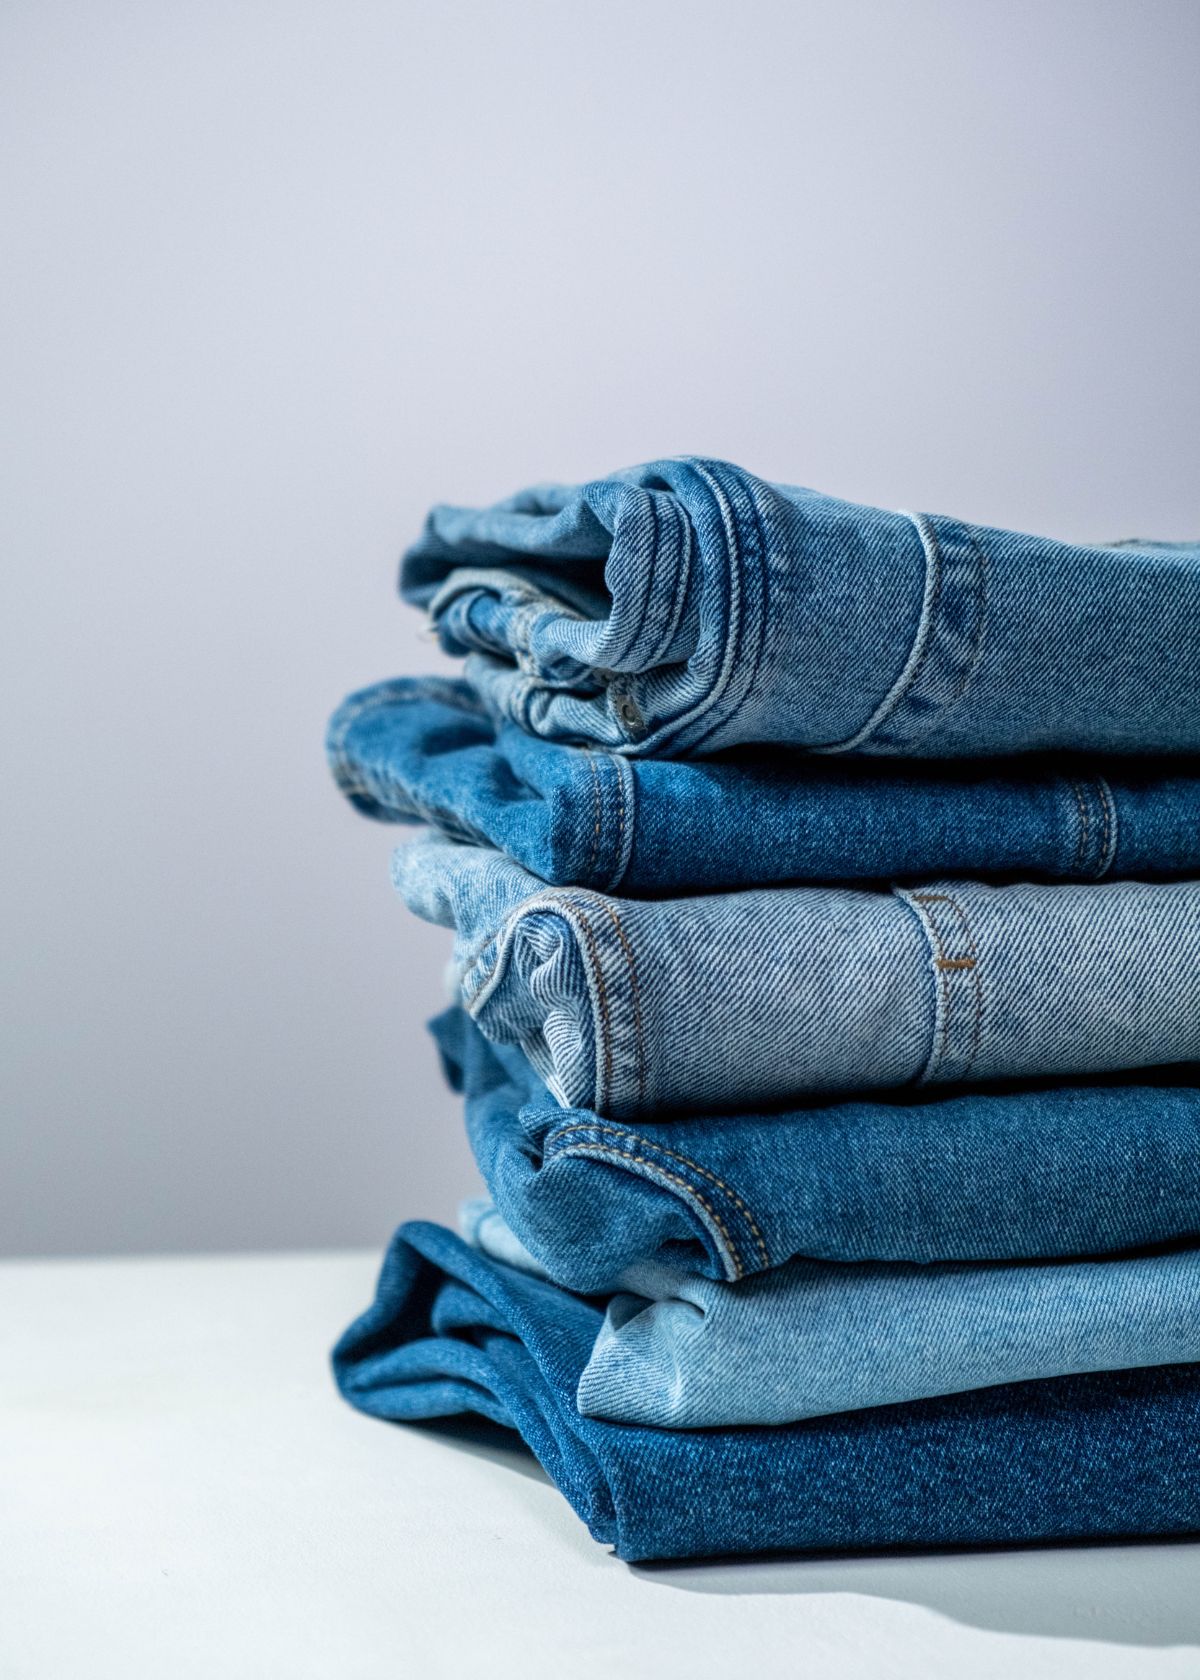 How to Organize Jeans